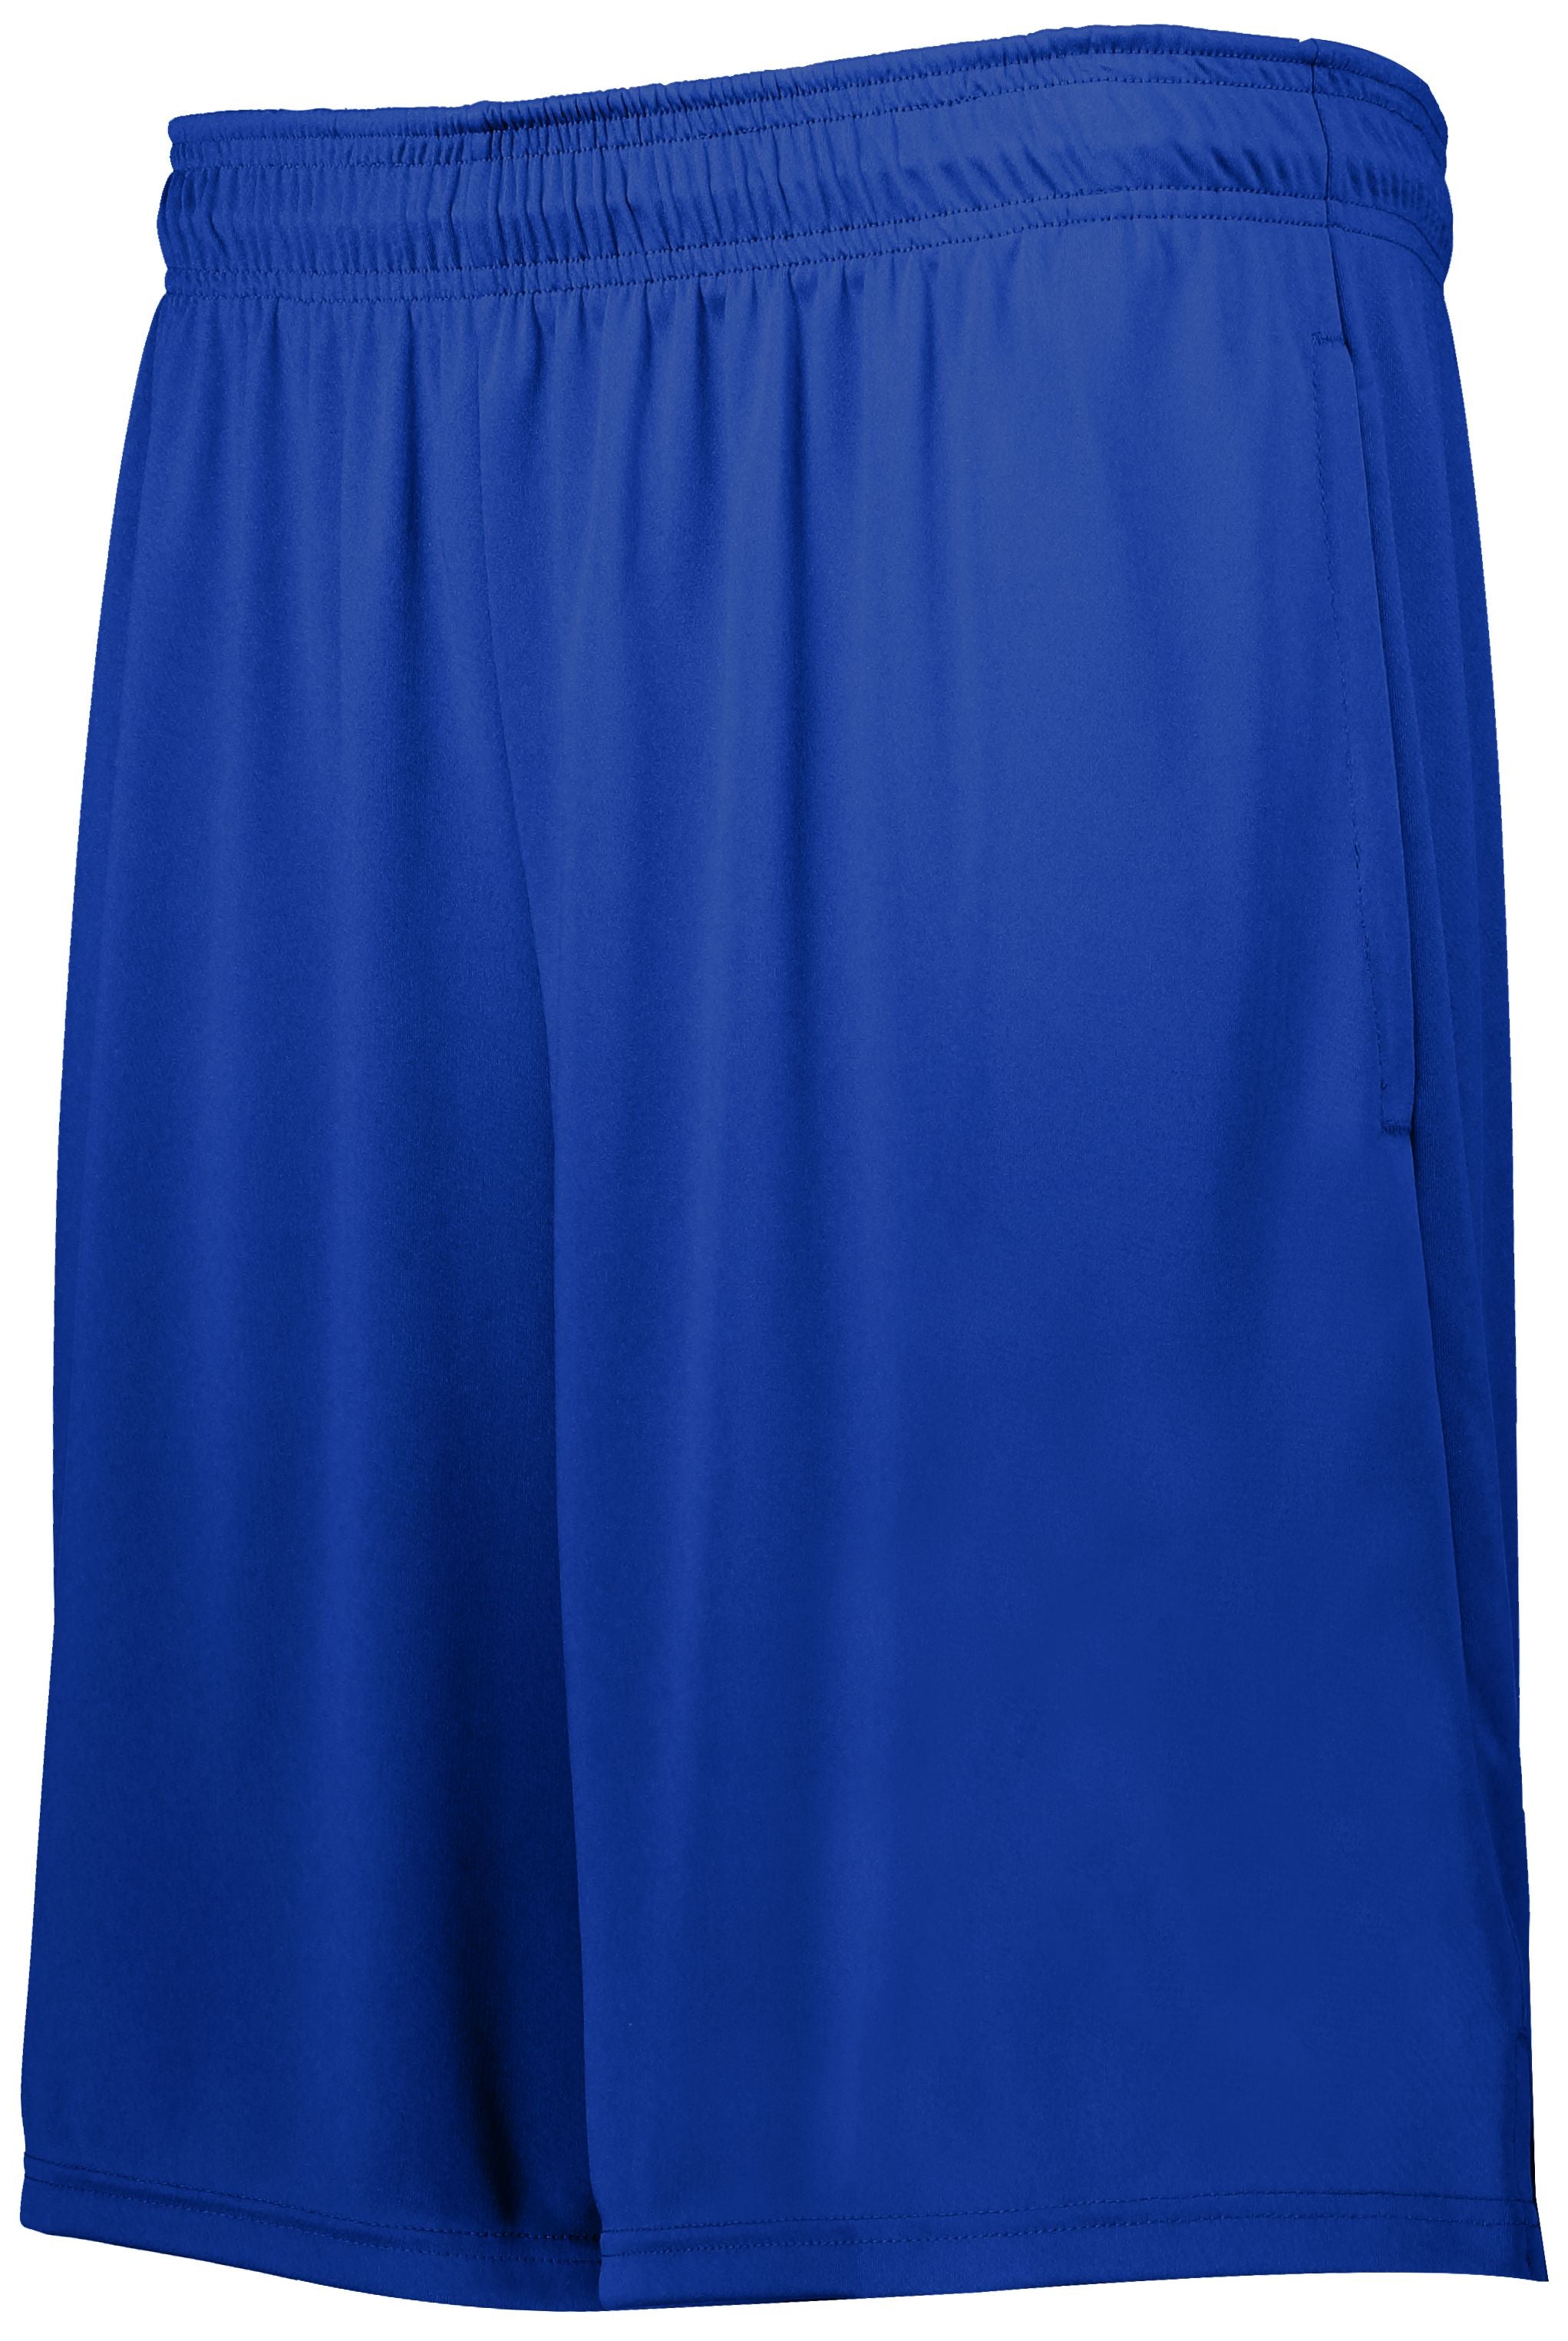 Holloway Whisk 2.0 Shorts in Royal  -Part of the Adult, Adult-Shorts, Holloway product lines at KanaleyCreations.com